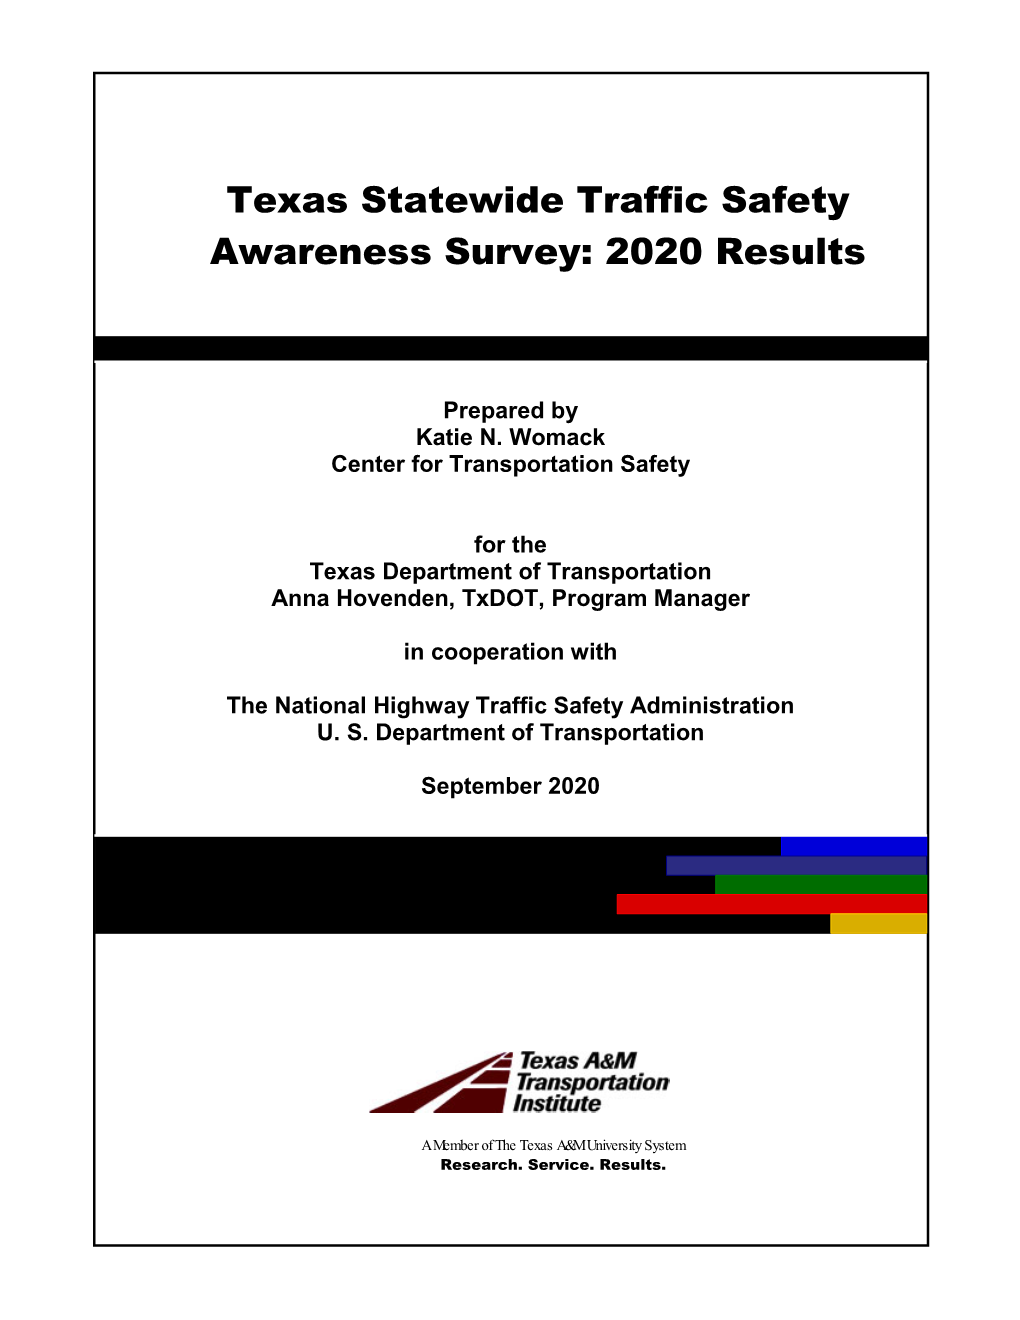 Texas Statewide Traffic Safety Awareness Survey: 2020 Results